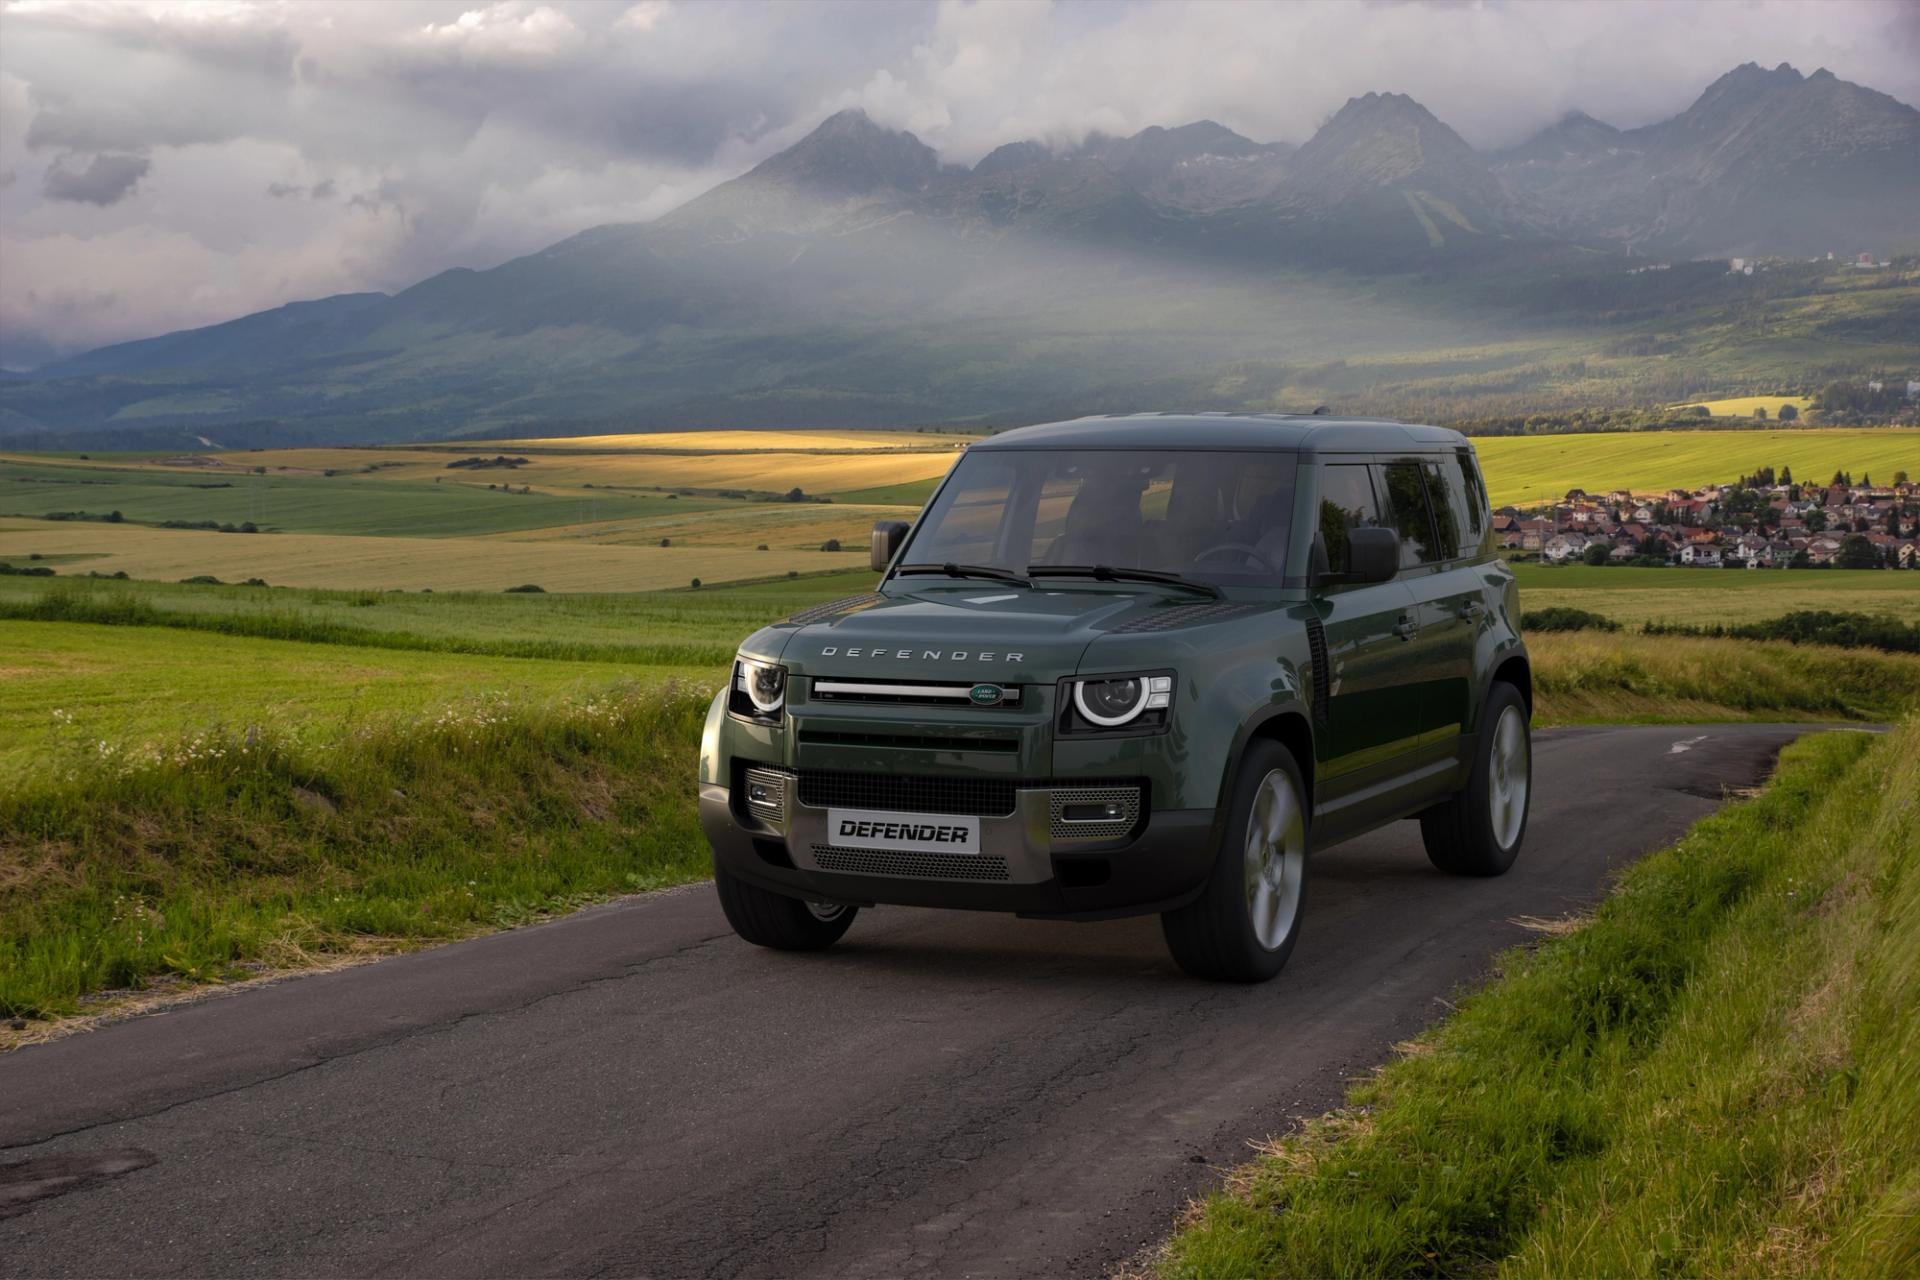 Land Rover Defender on a scenic road